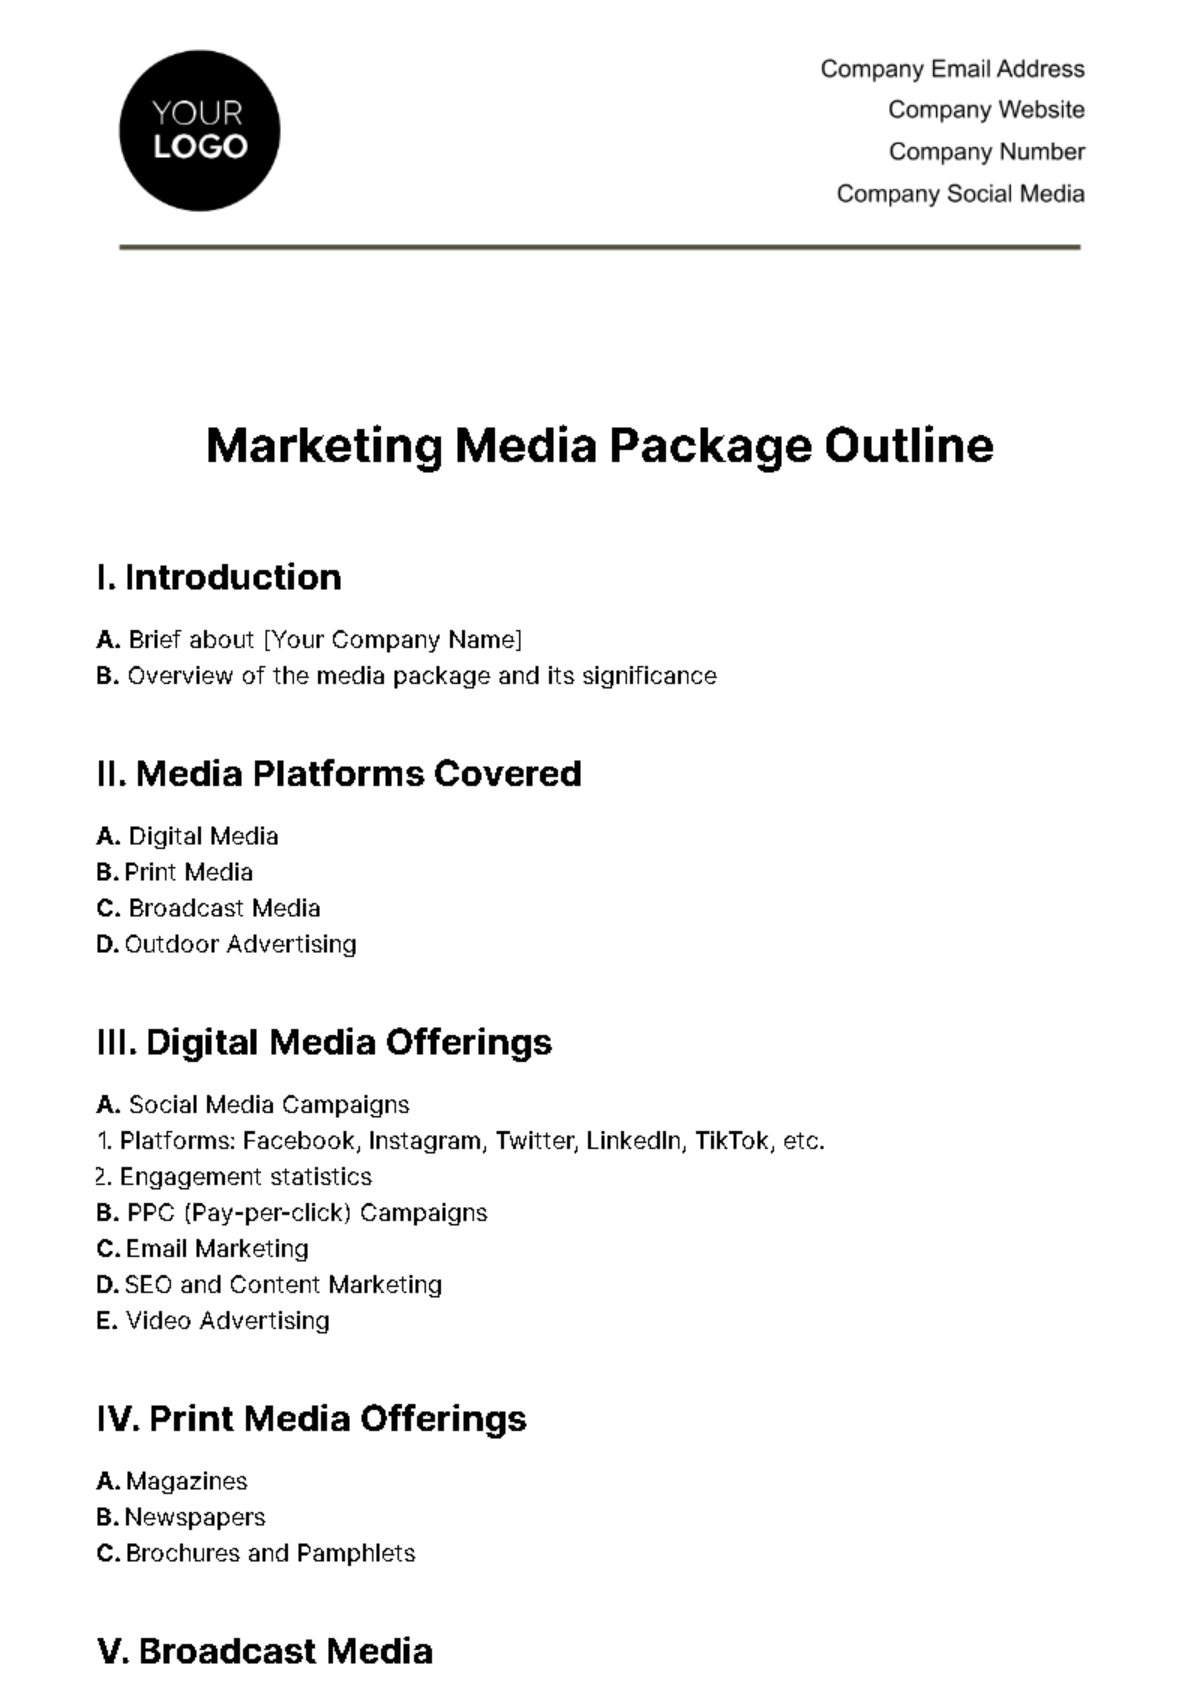 Free Marketing Media Package Outline Template